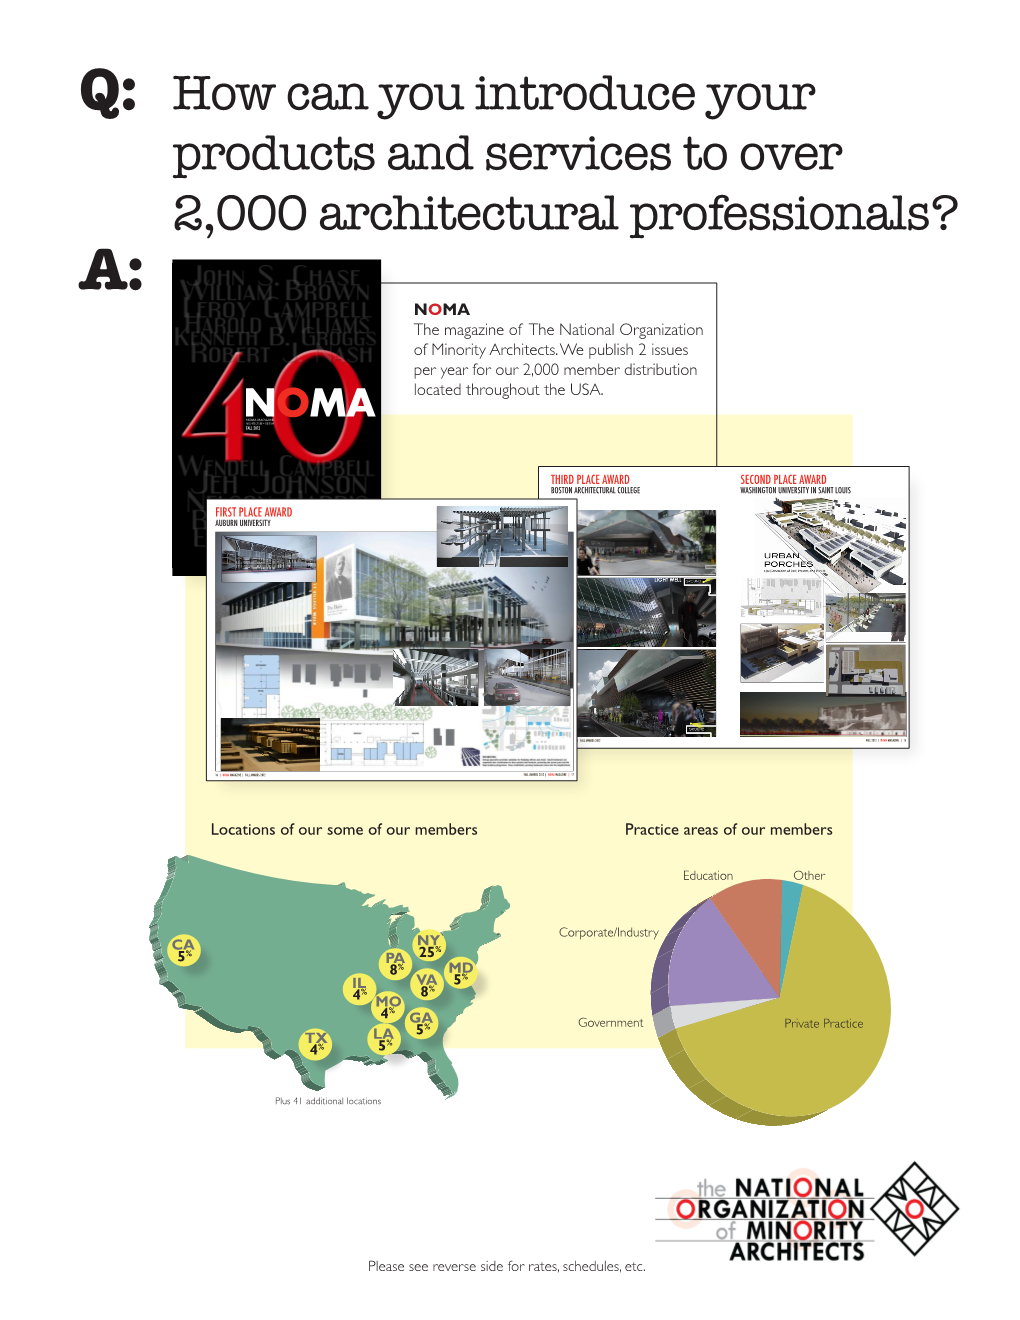 How Can You Introduce Your Products and Services to Over 2000 Architectural Professionals?